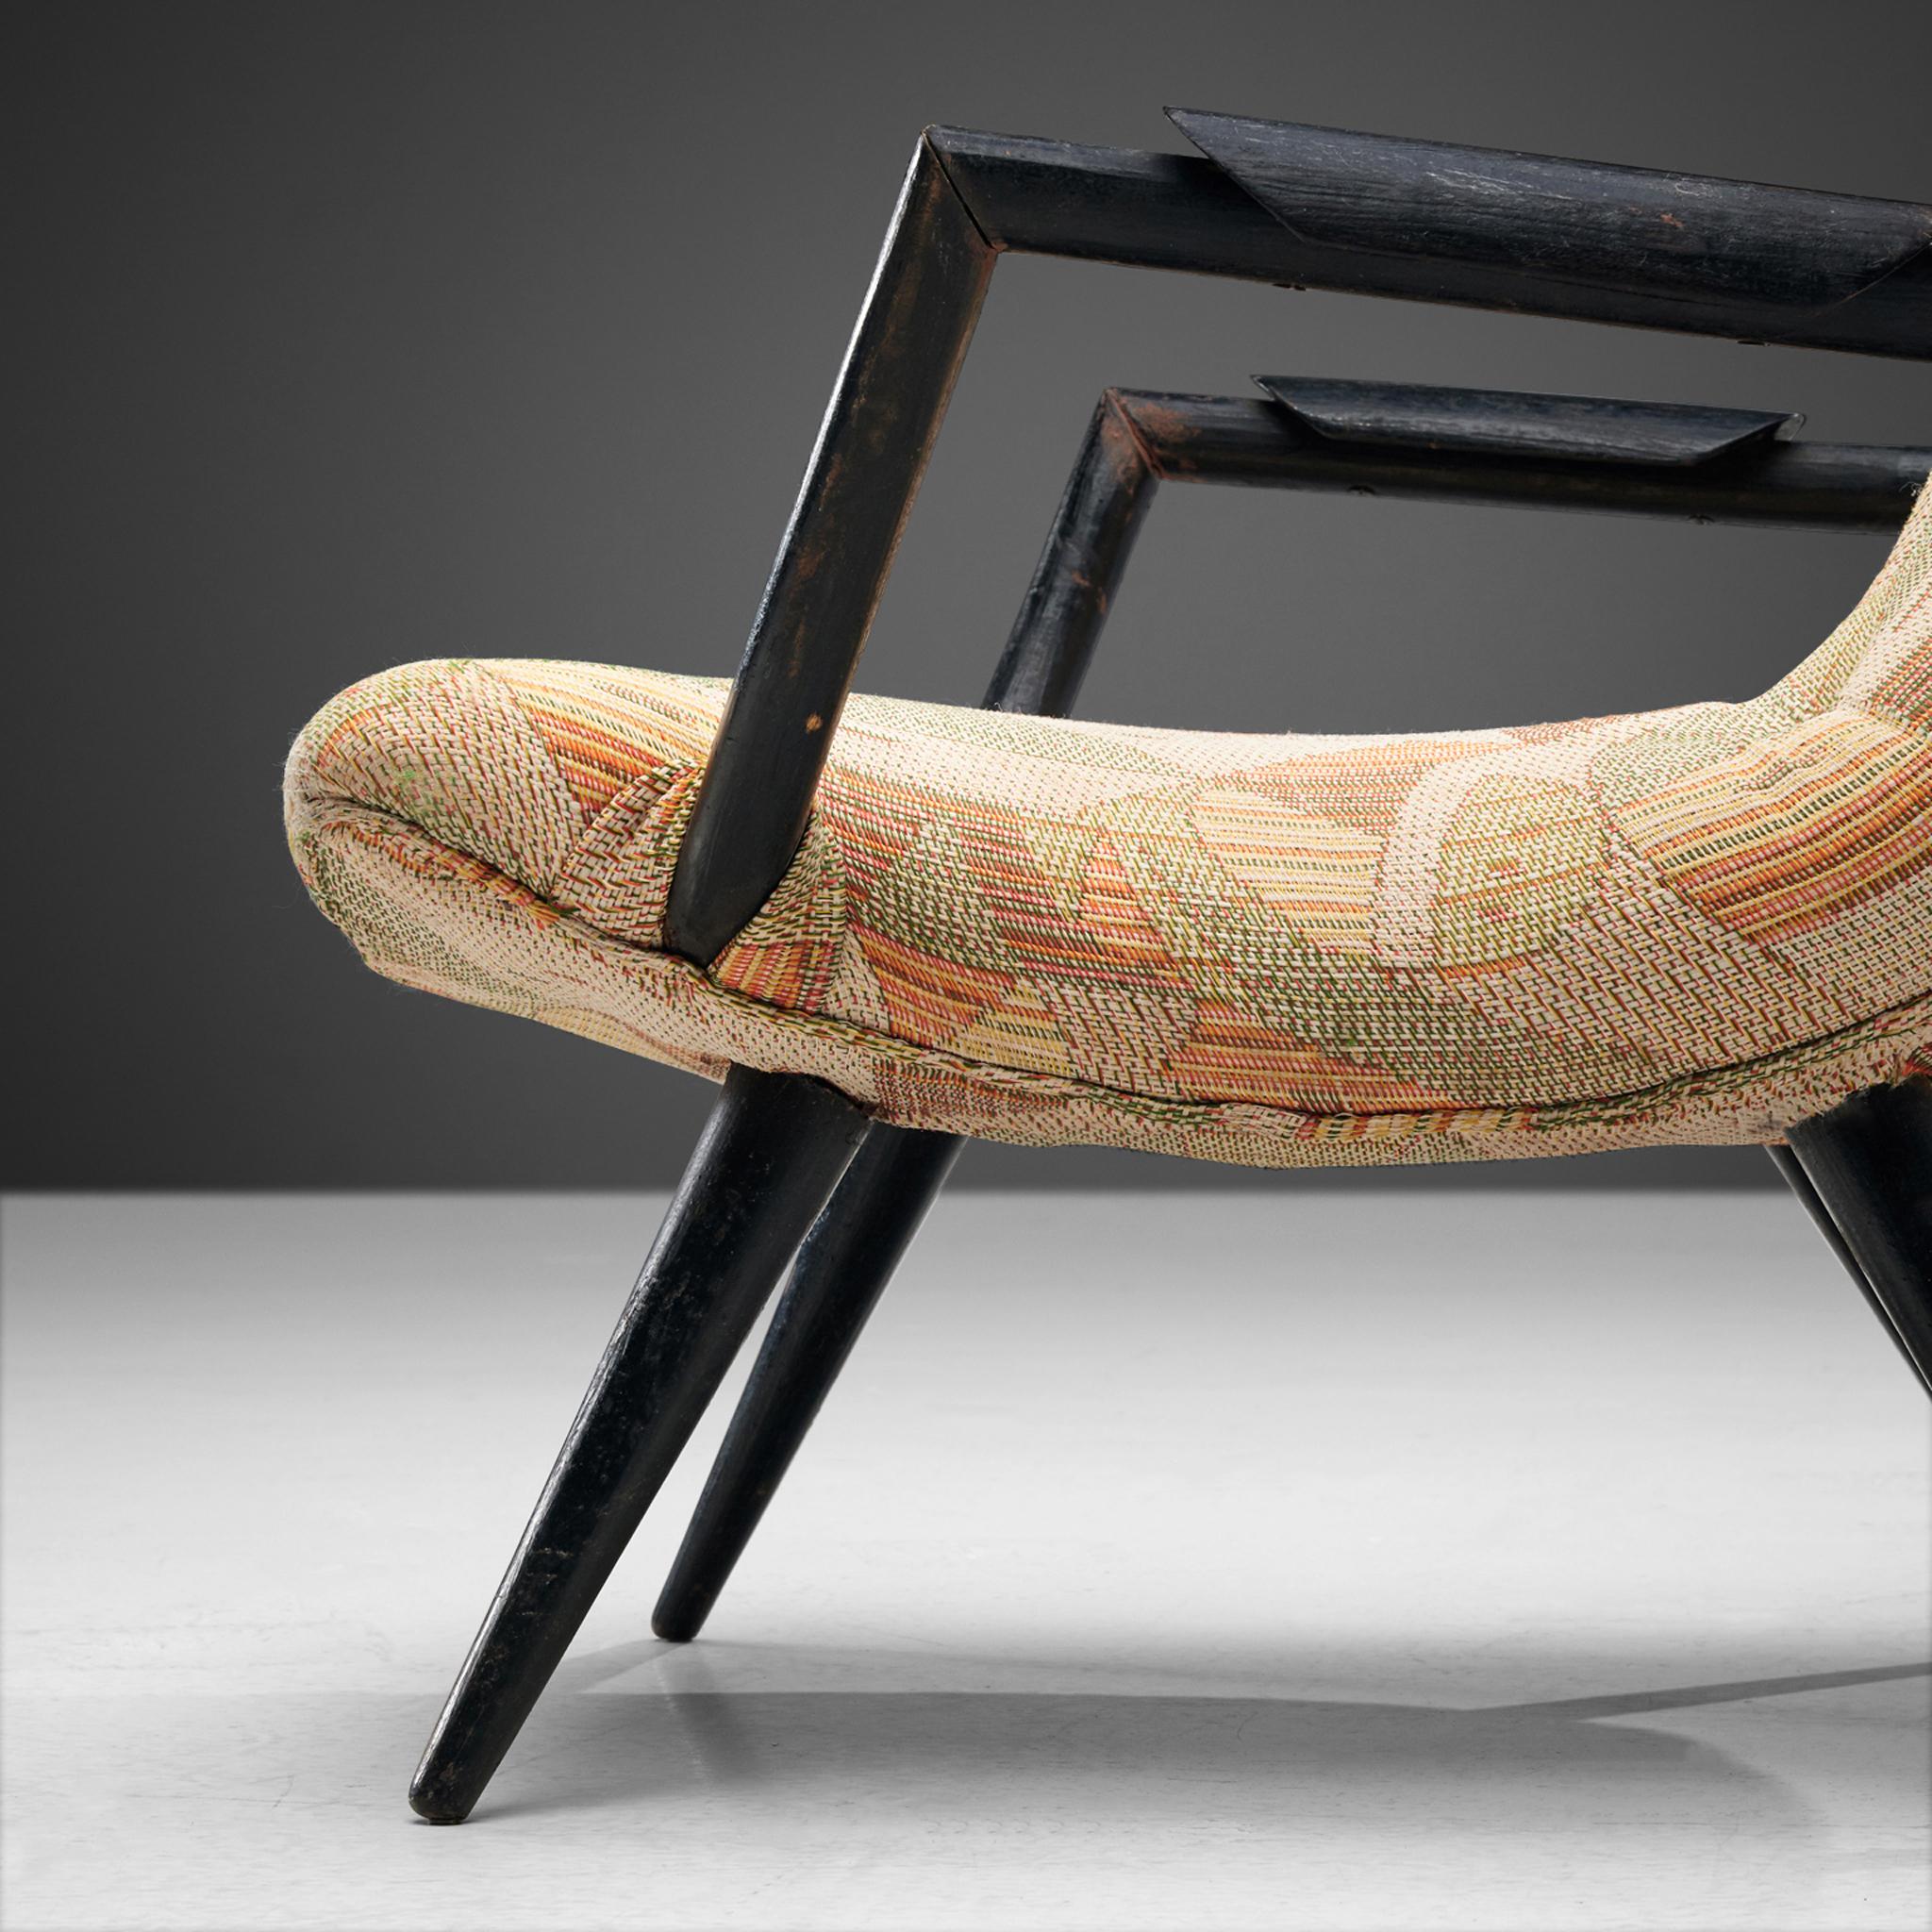 Brazilian Giuseppe Scapinelli Lounge Chair in Patterned Upholstery and Black Wooden Frame